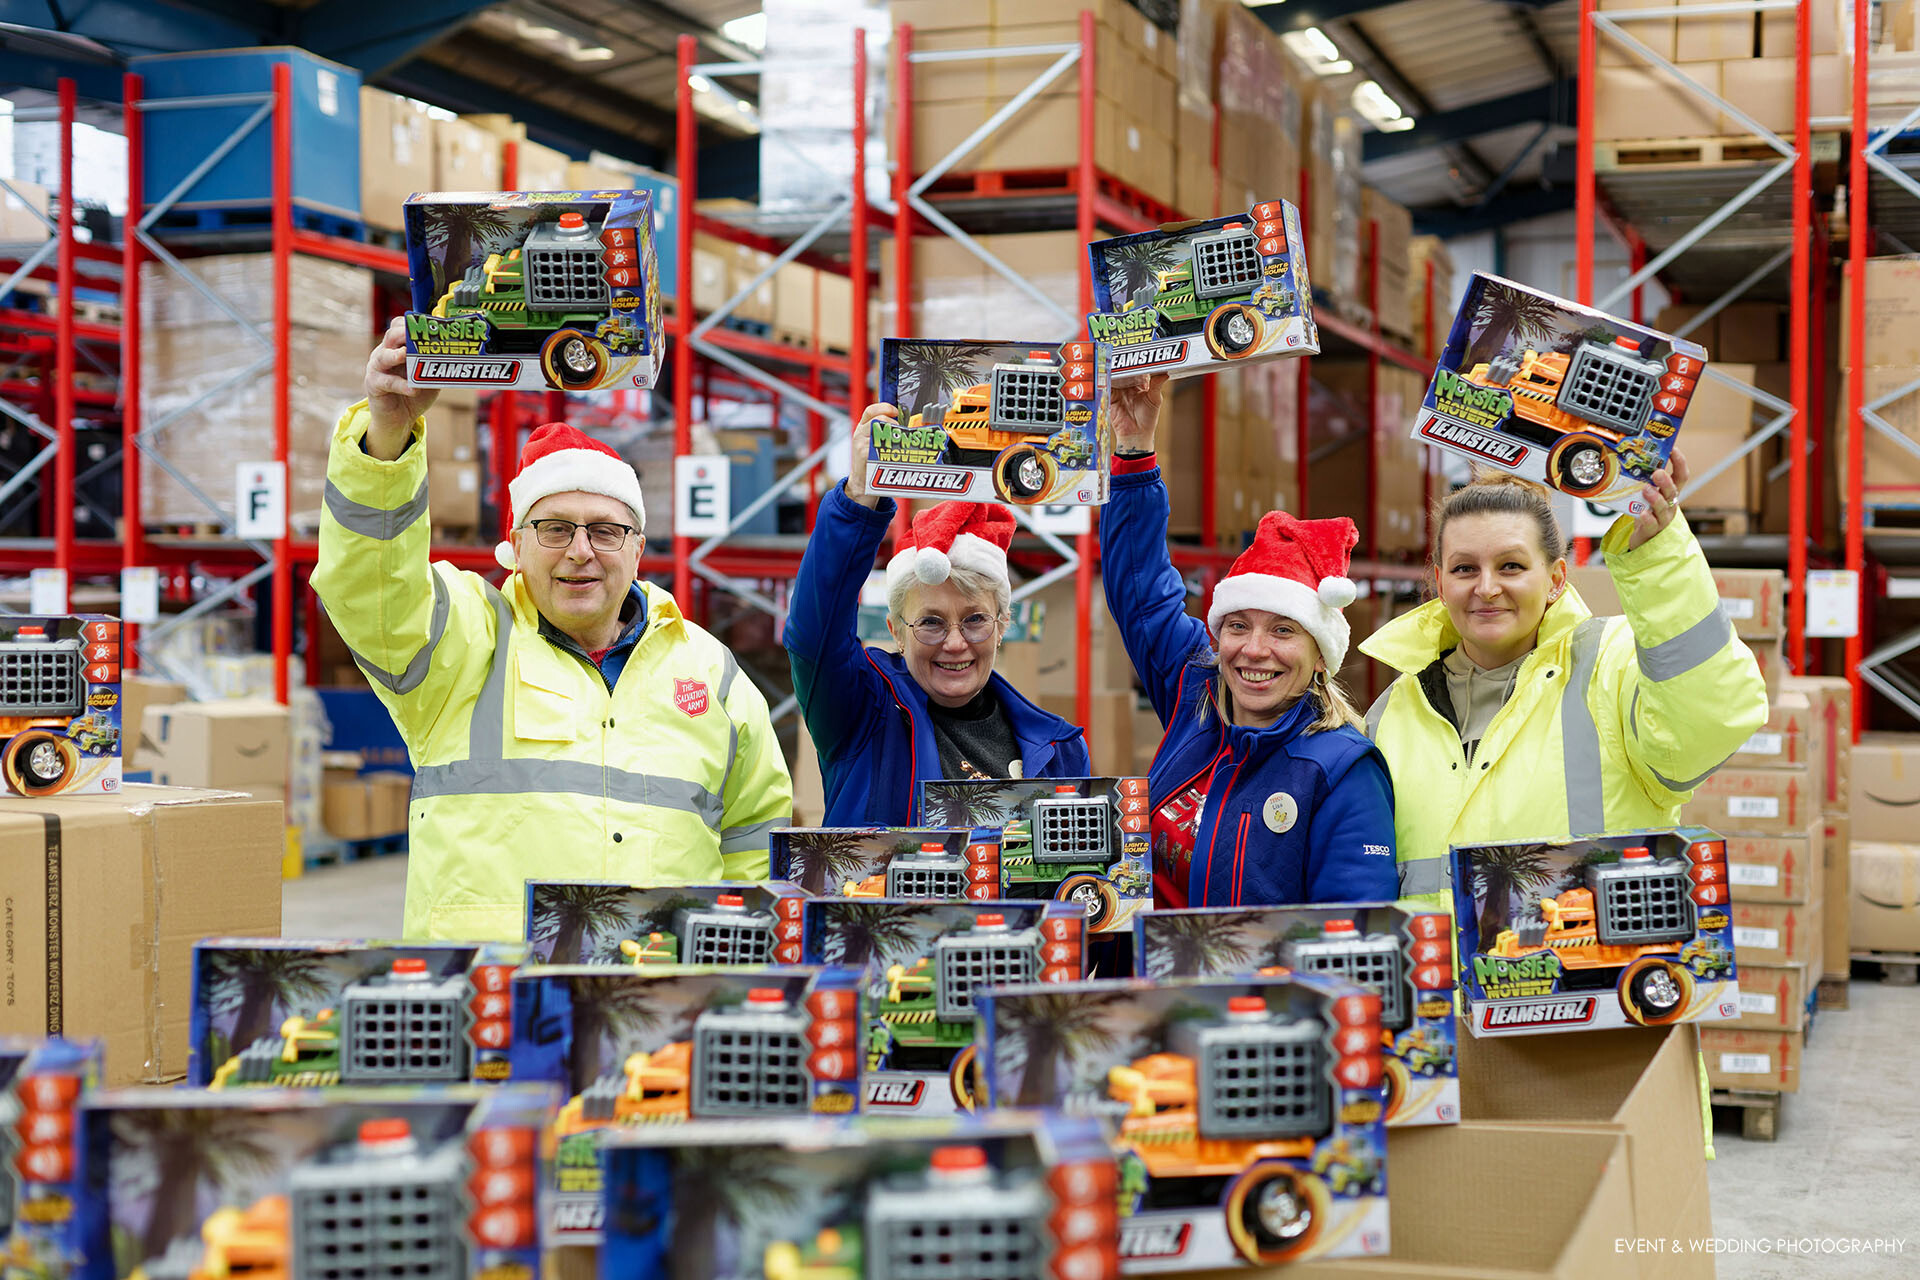 Tesco and Salvation Army staff pose with boxes of toys that Tesco donated to the Salvation Army's 2022 Christmas Present Appeal.